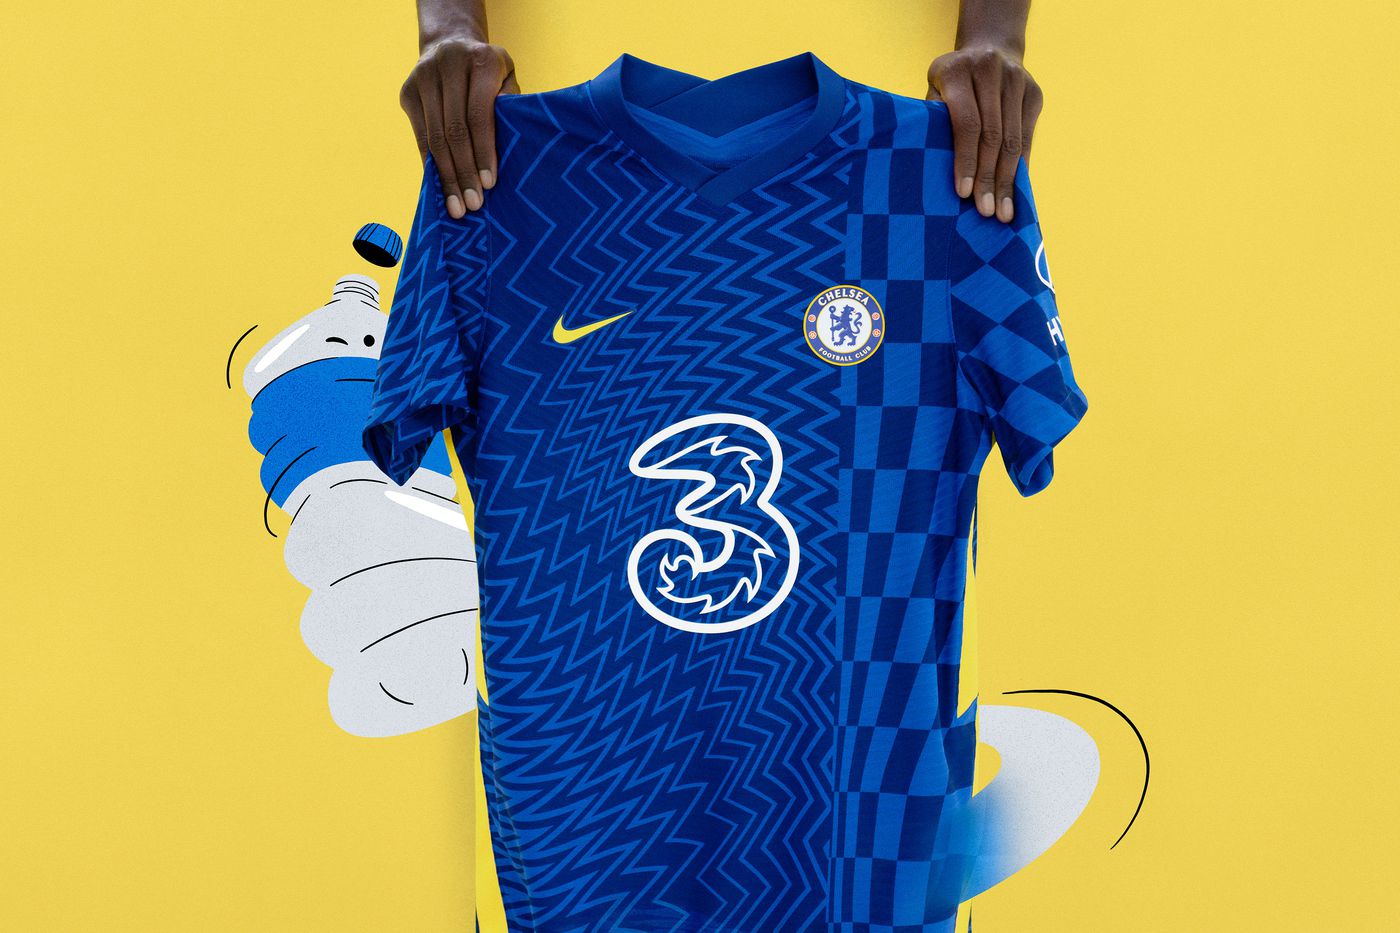 Lokken Wissen kraan Nike unveil new 2021-22 Chelsea home shirt with most groovy kit launch  video - We Ain't Got No History